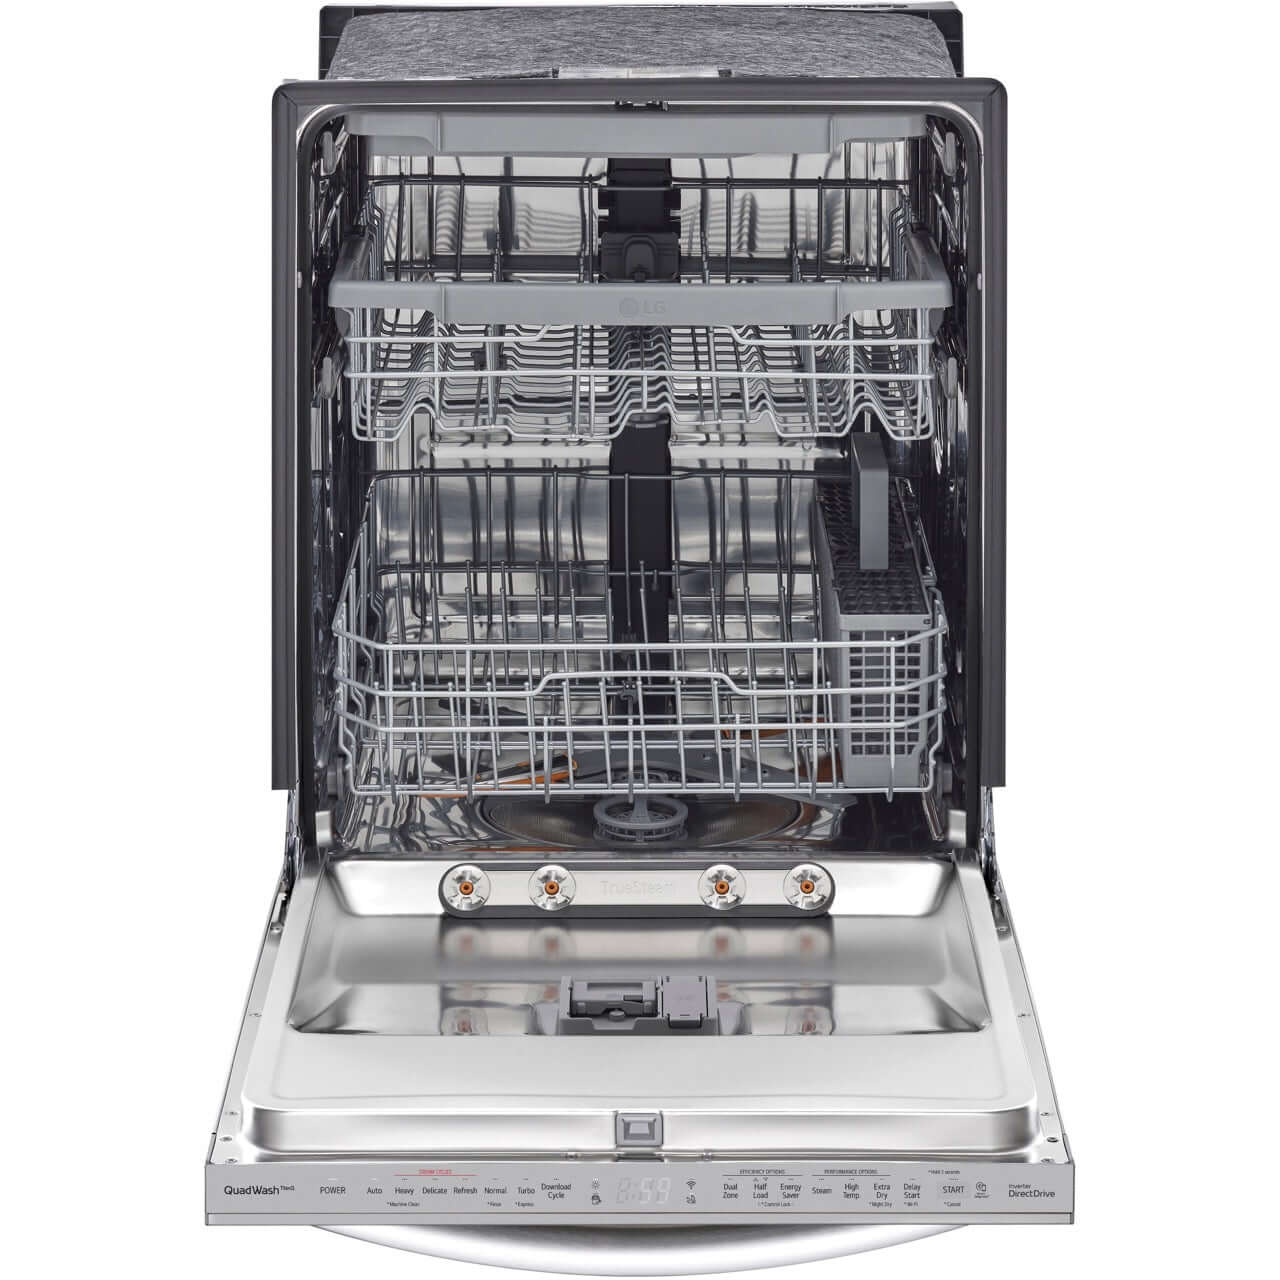 LG 24-Inch Top Control Wi-Fi Enabled Dishwasher with TrueSteam and 3rd Rack (LDTS5552S)